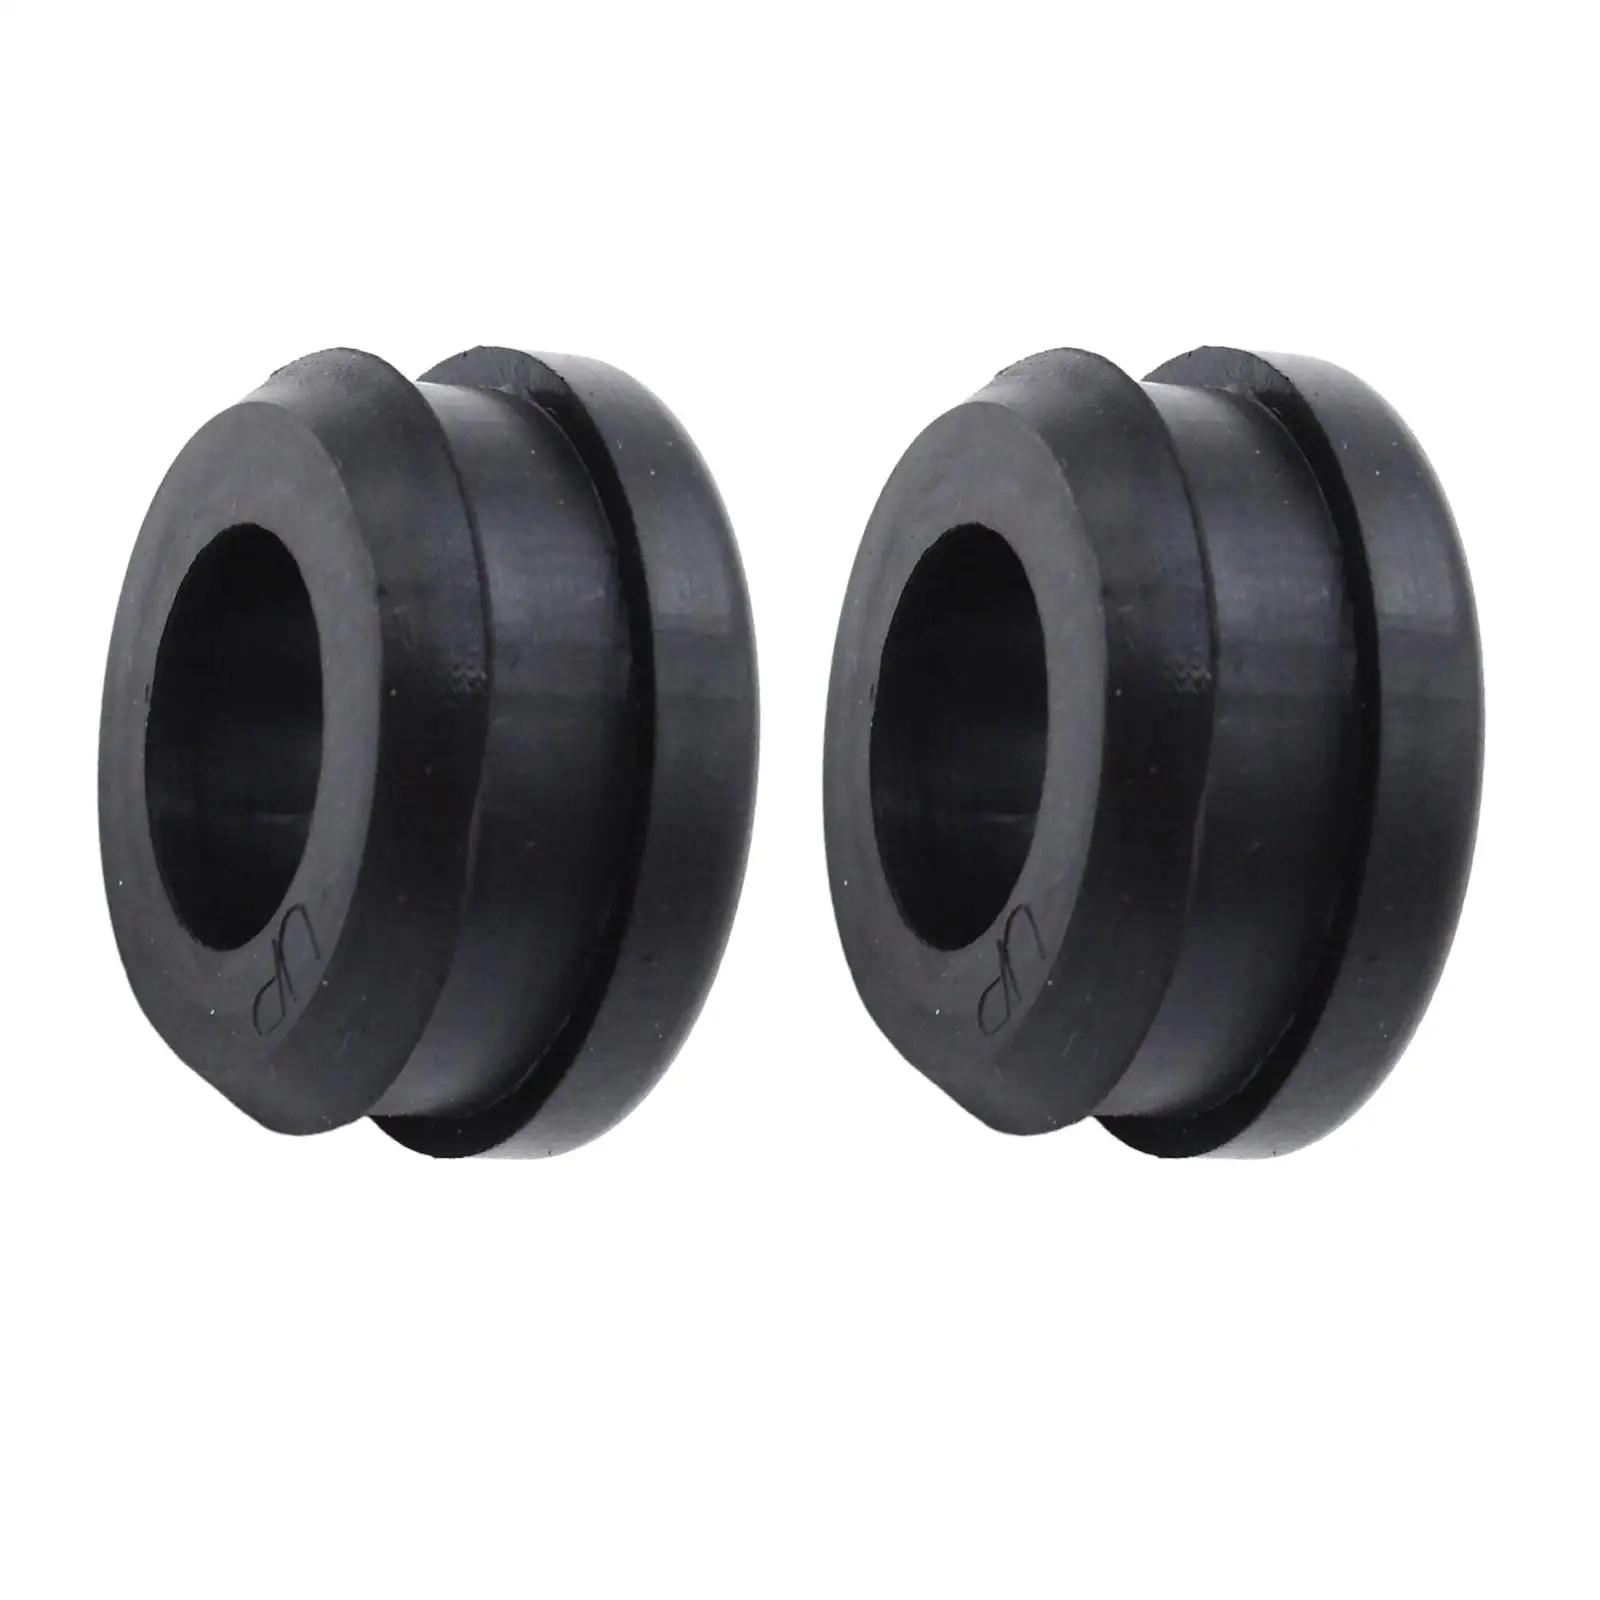 2Pcs Rubber Pcv Breather Grommets, Car Supplies Steel Covers Fit for Sbc Sbf Replacement